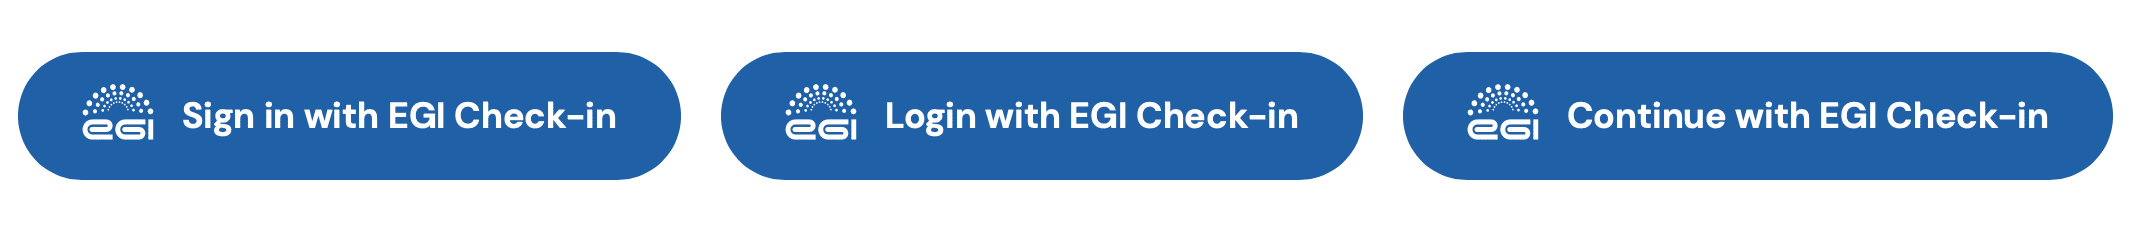 EGI Check-in buttons blue